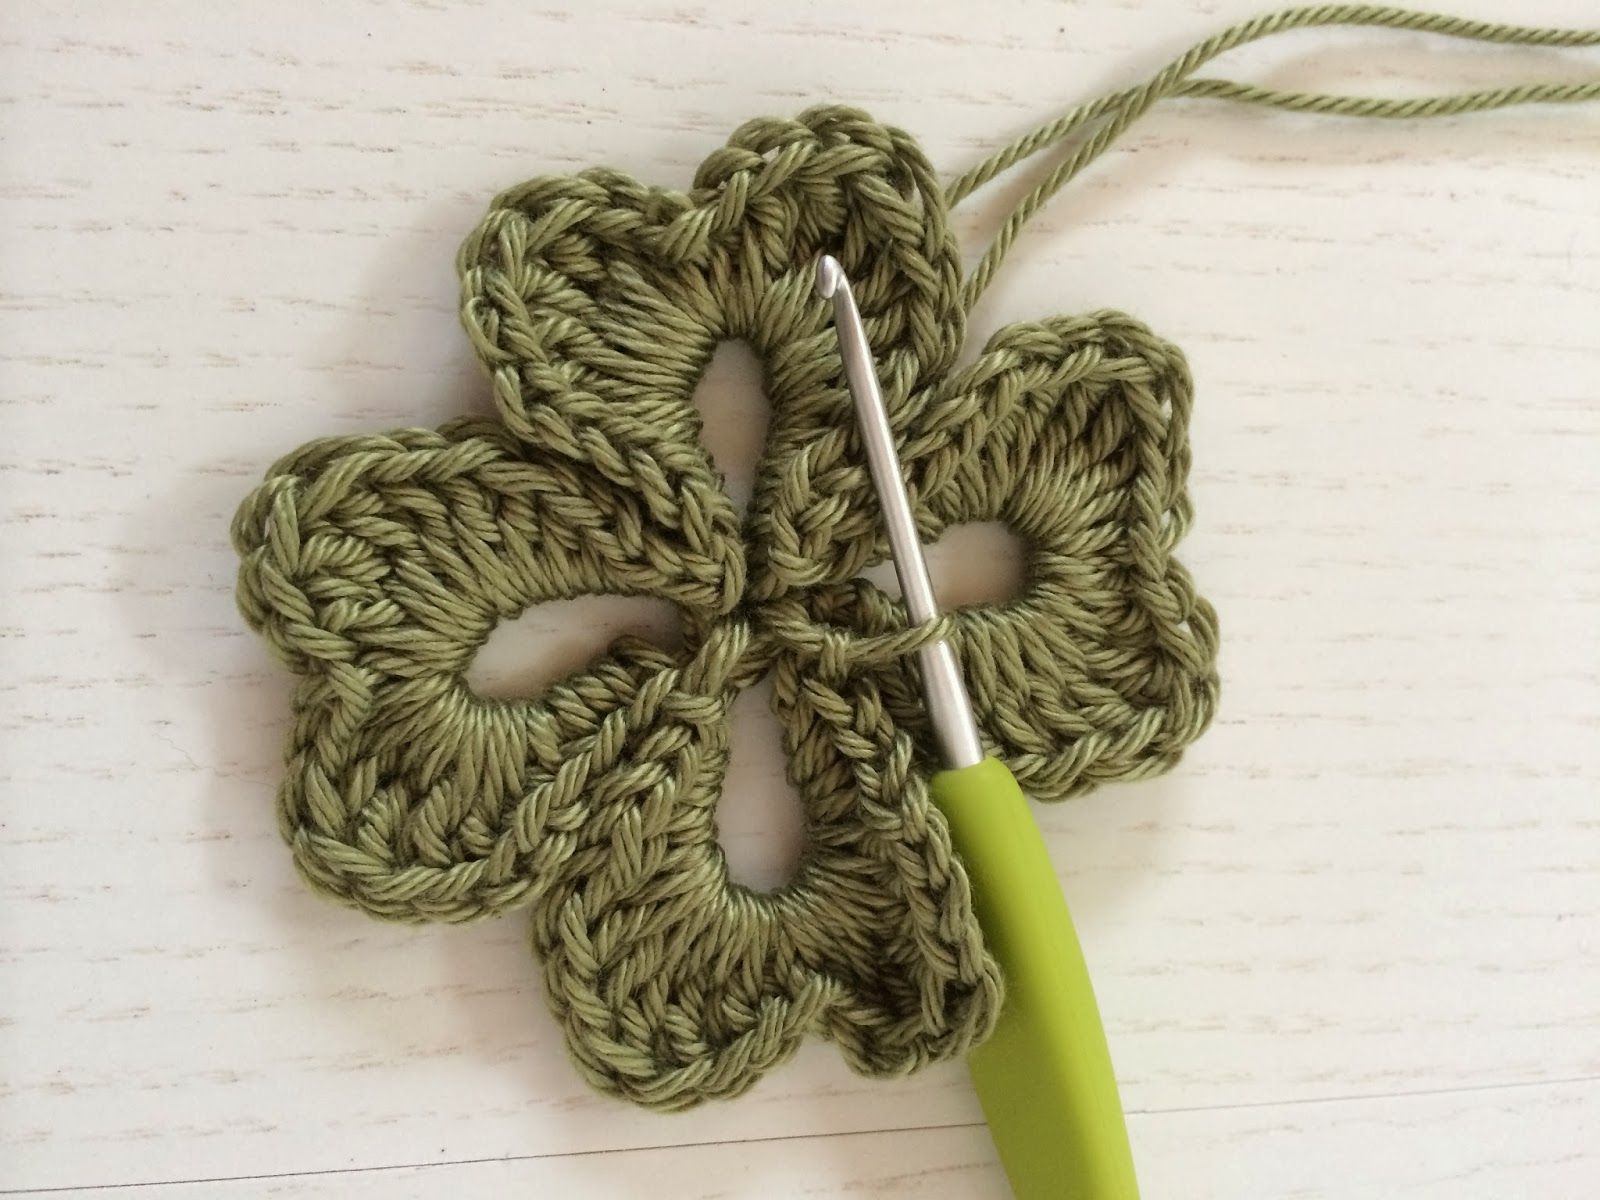 Clover Crochet Pattern Irish Clover Granny Square I Like This For The Free 4 Leaf Clover